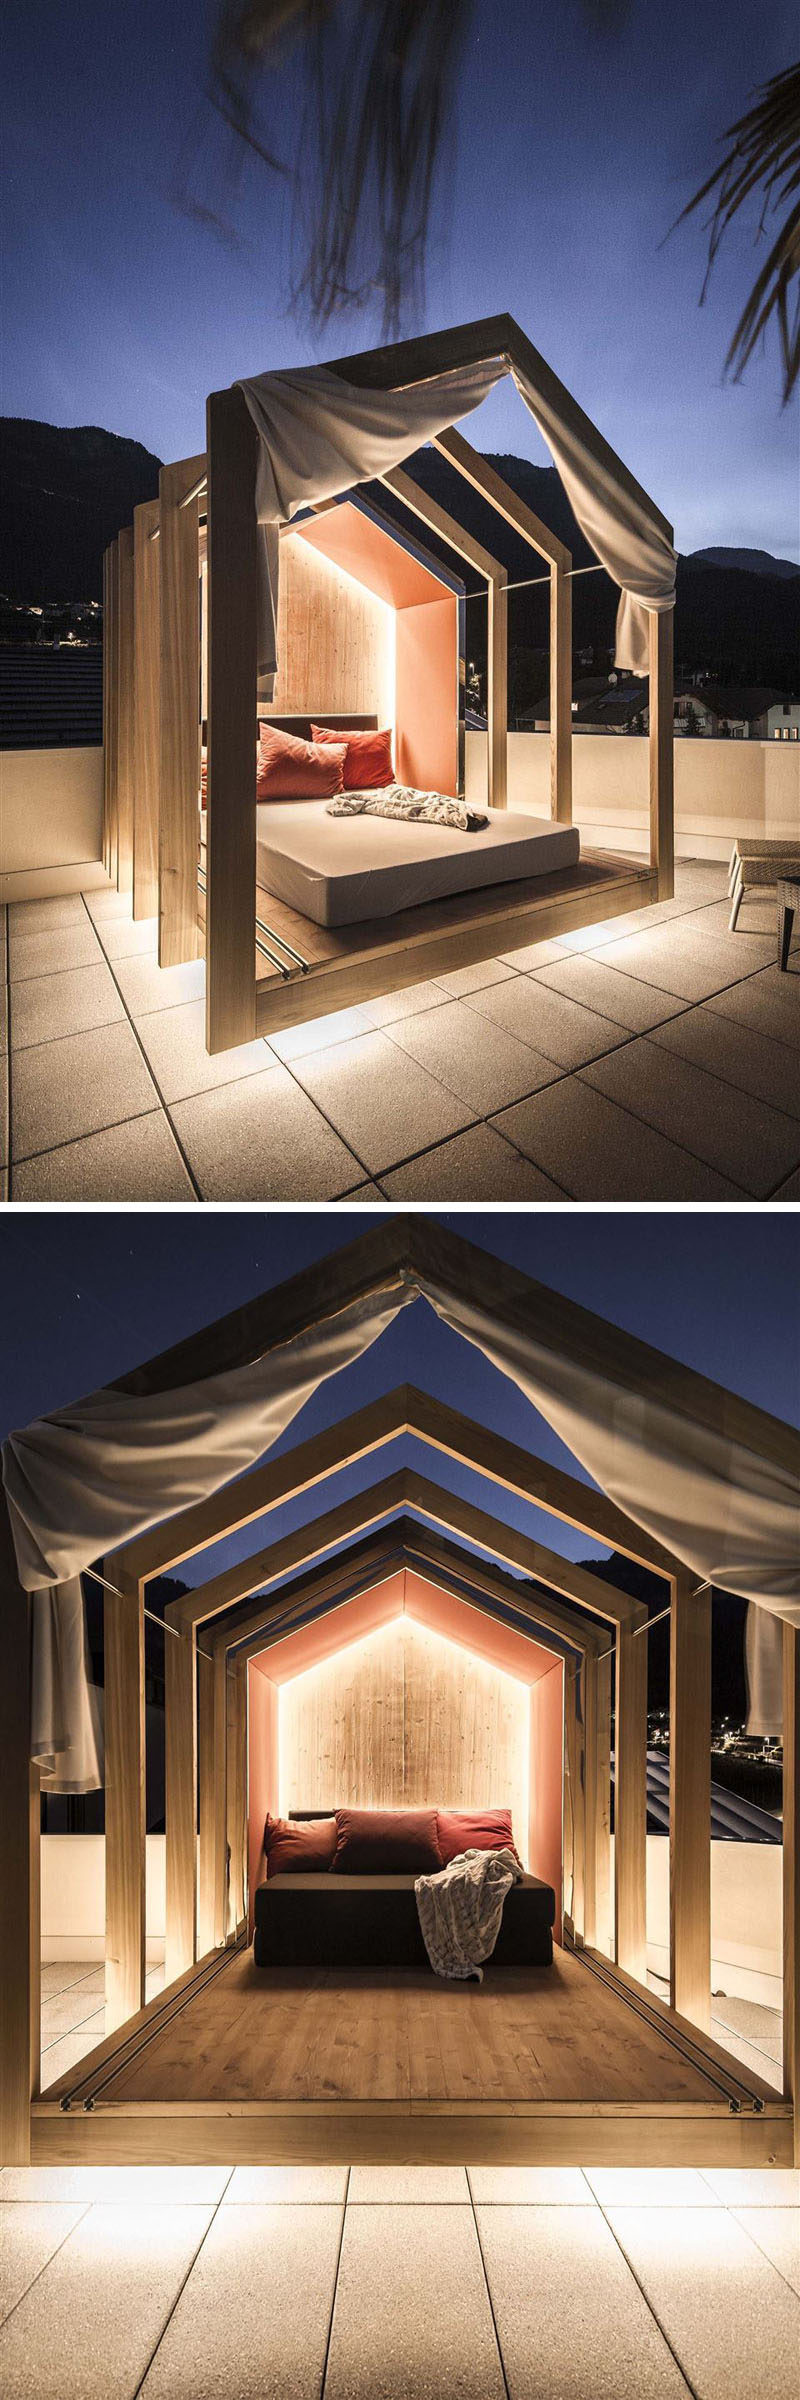 The Rooftop Bedroom At This Hotel Lets You Lie In Comfort When Stargazing